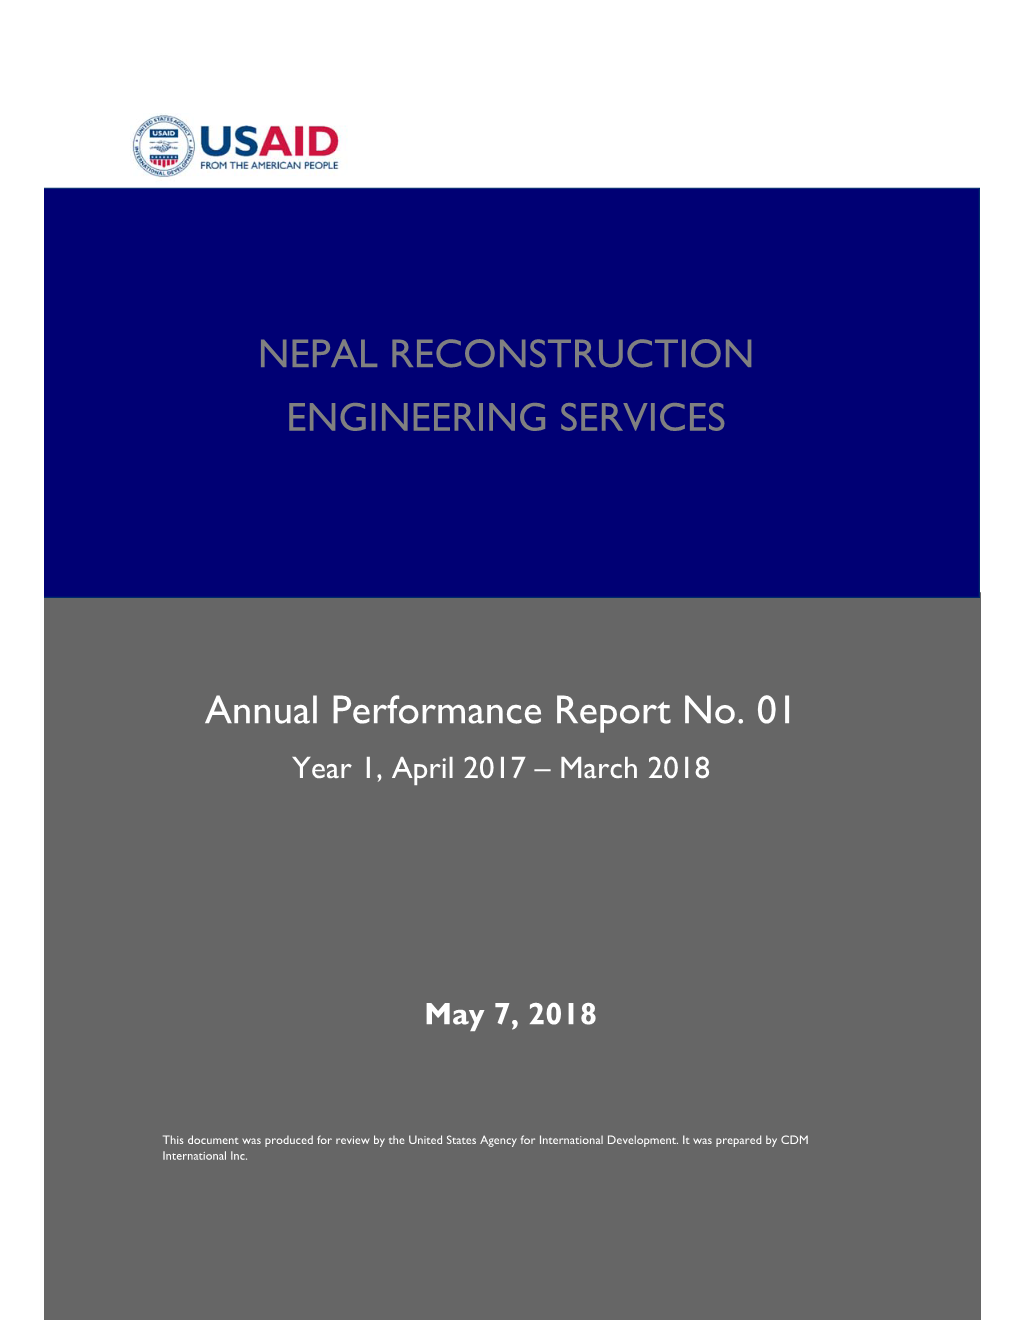 NRES Annual Performance Report #1 7May18.Docx